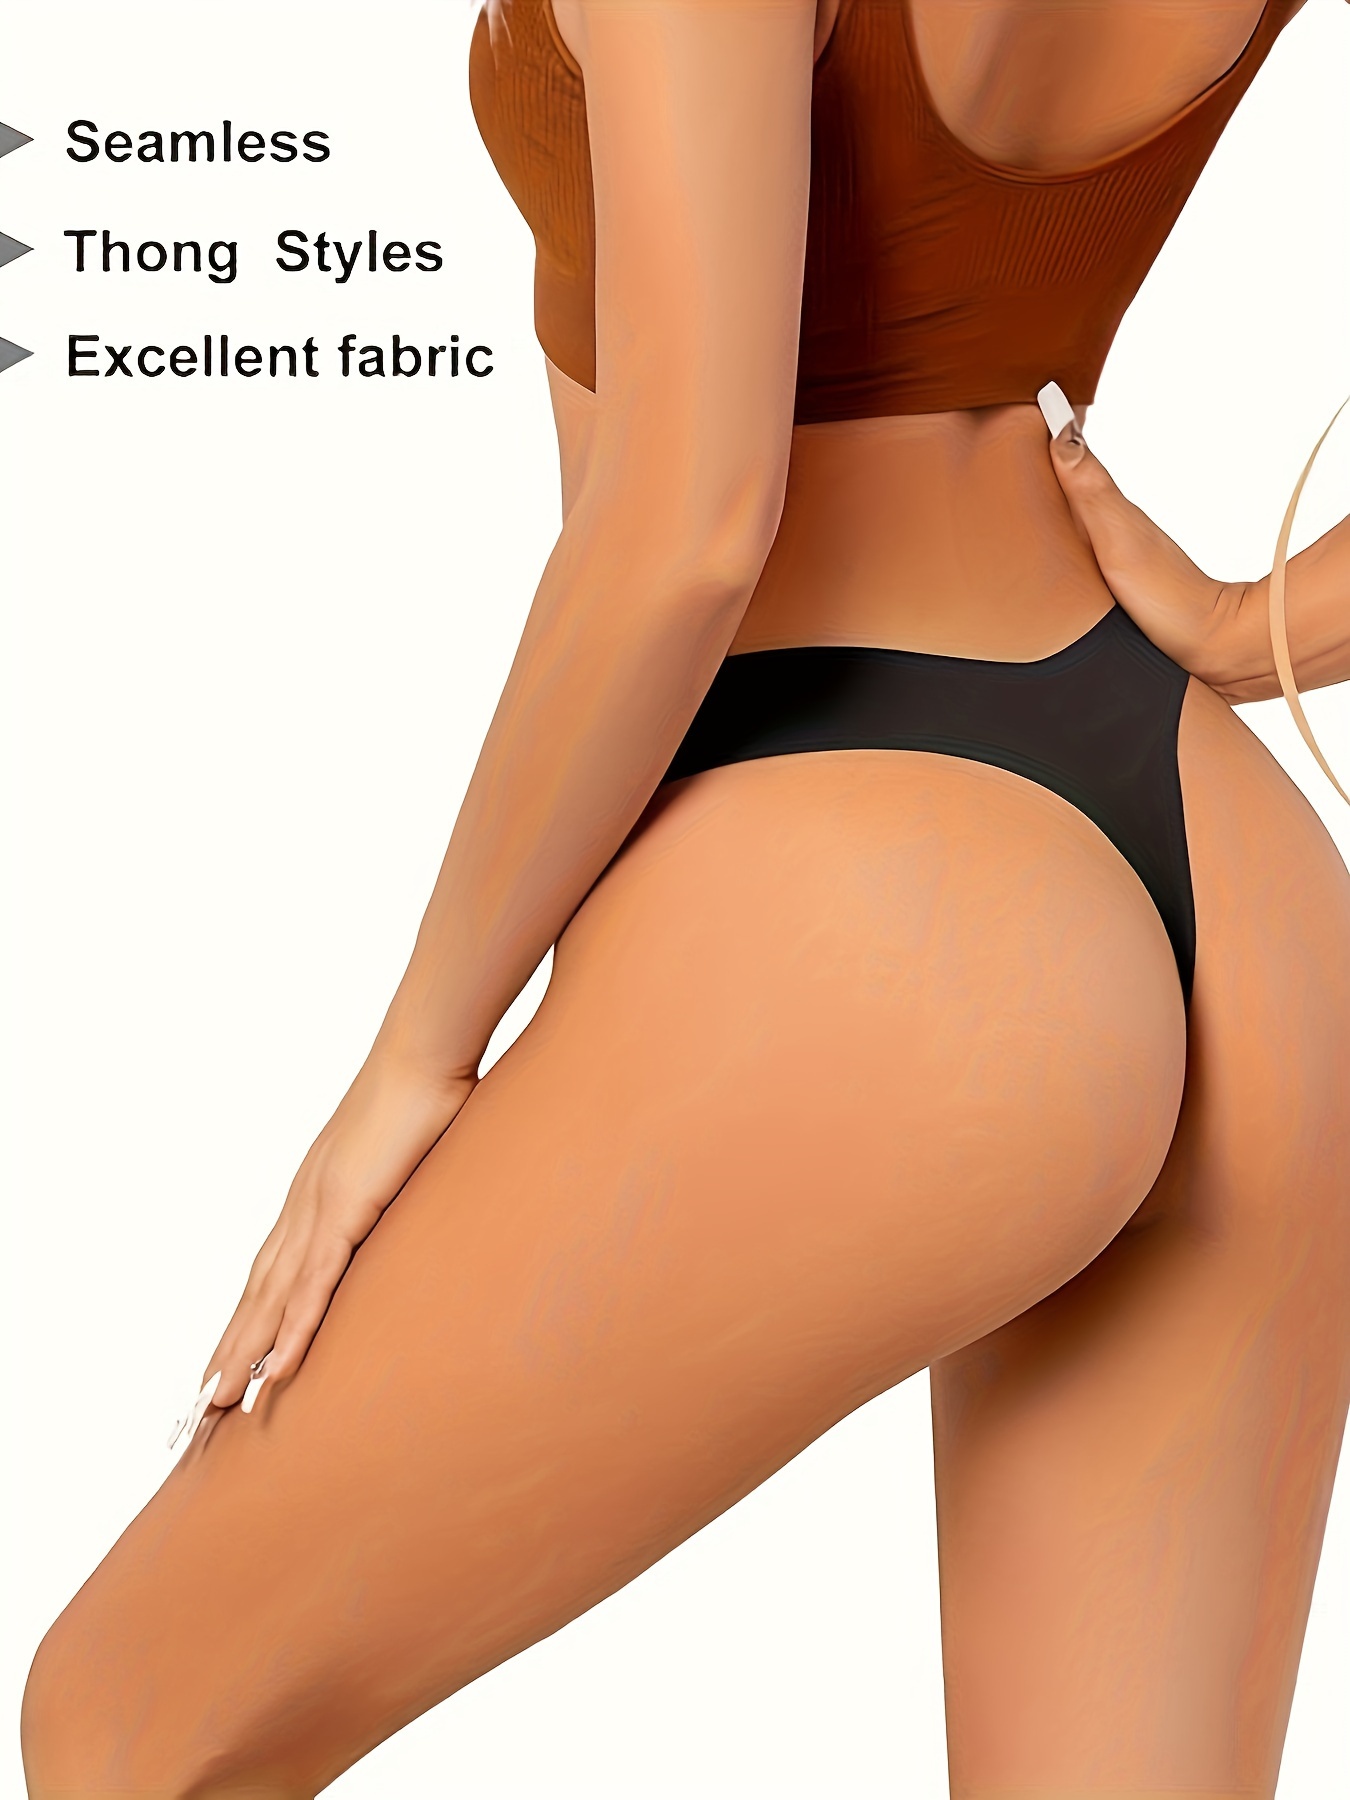 Women's Sexy V-shaped Thong Underpants Sexy Low Waist Seamless Underpants 